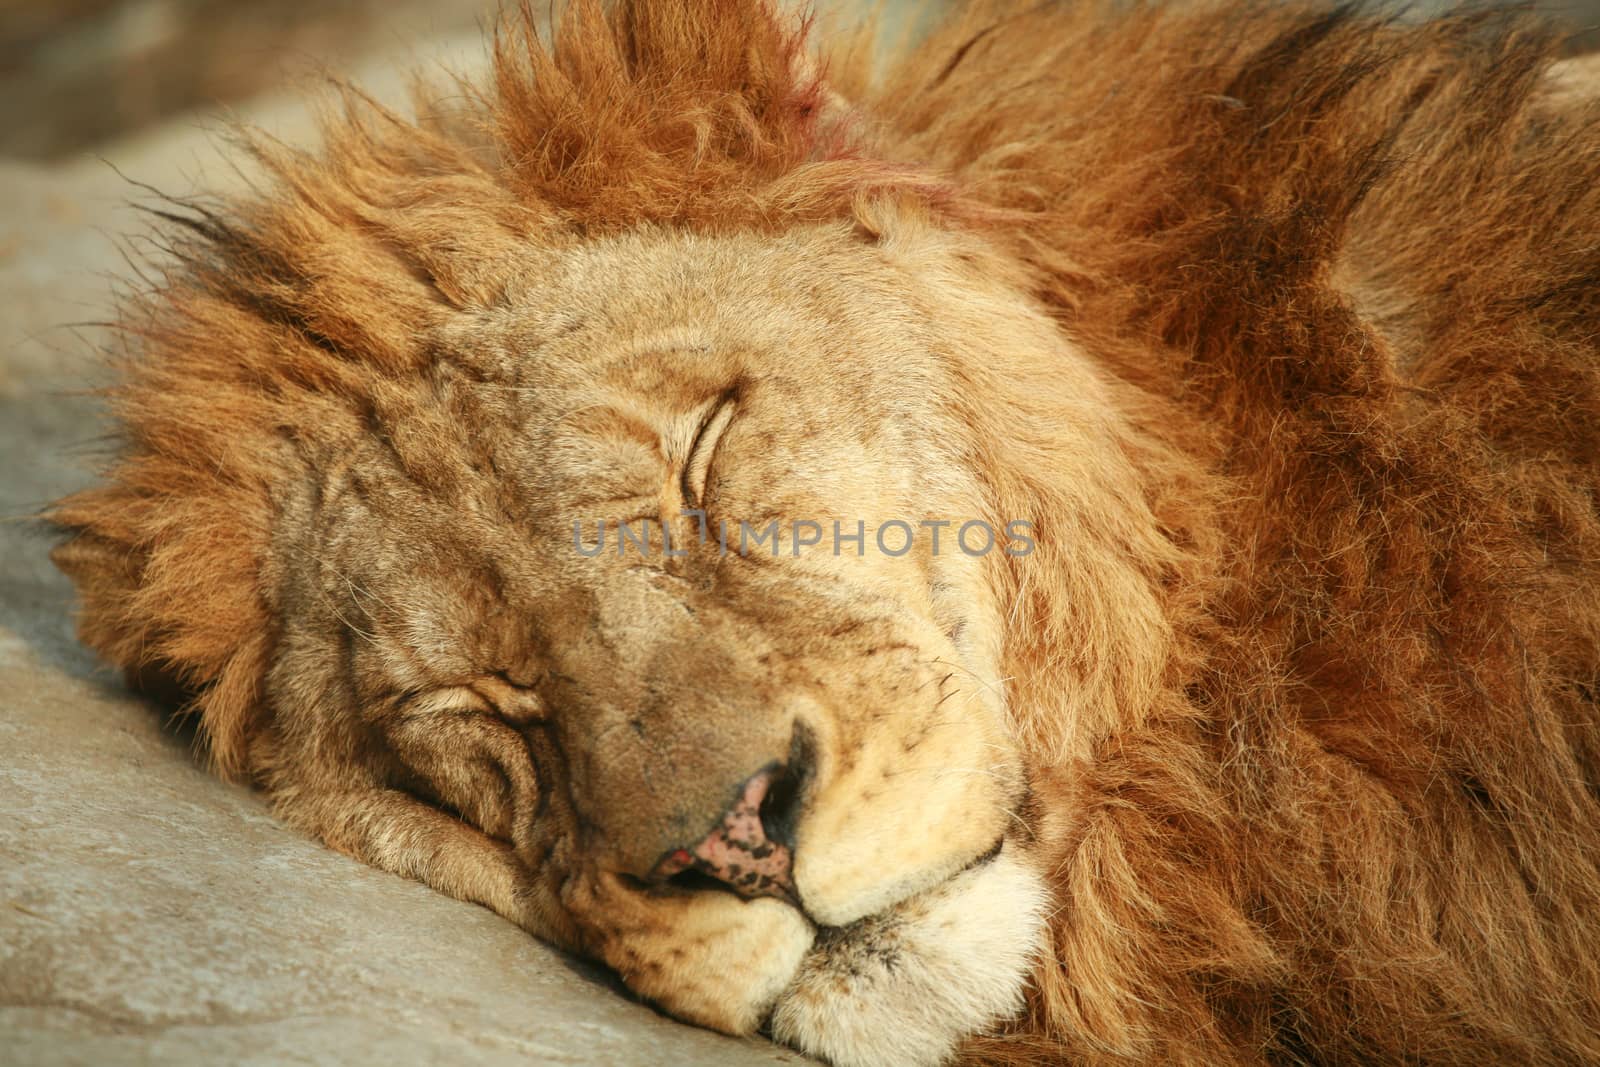 Sleeping Lion by think4photop